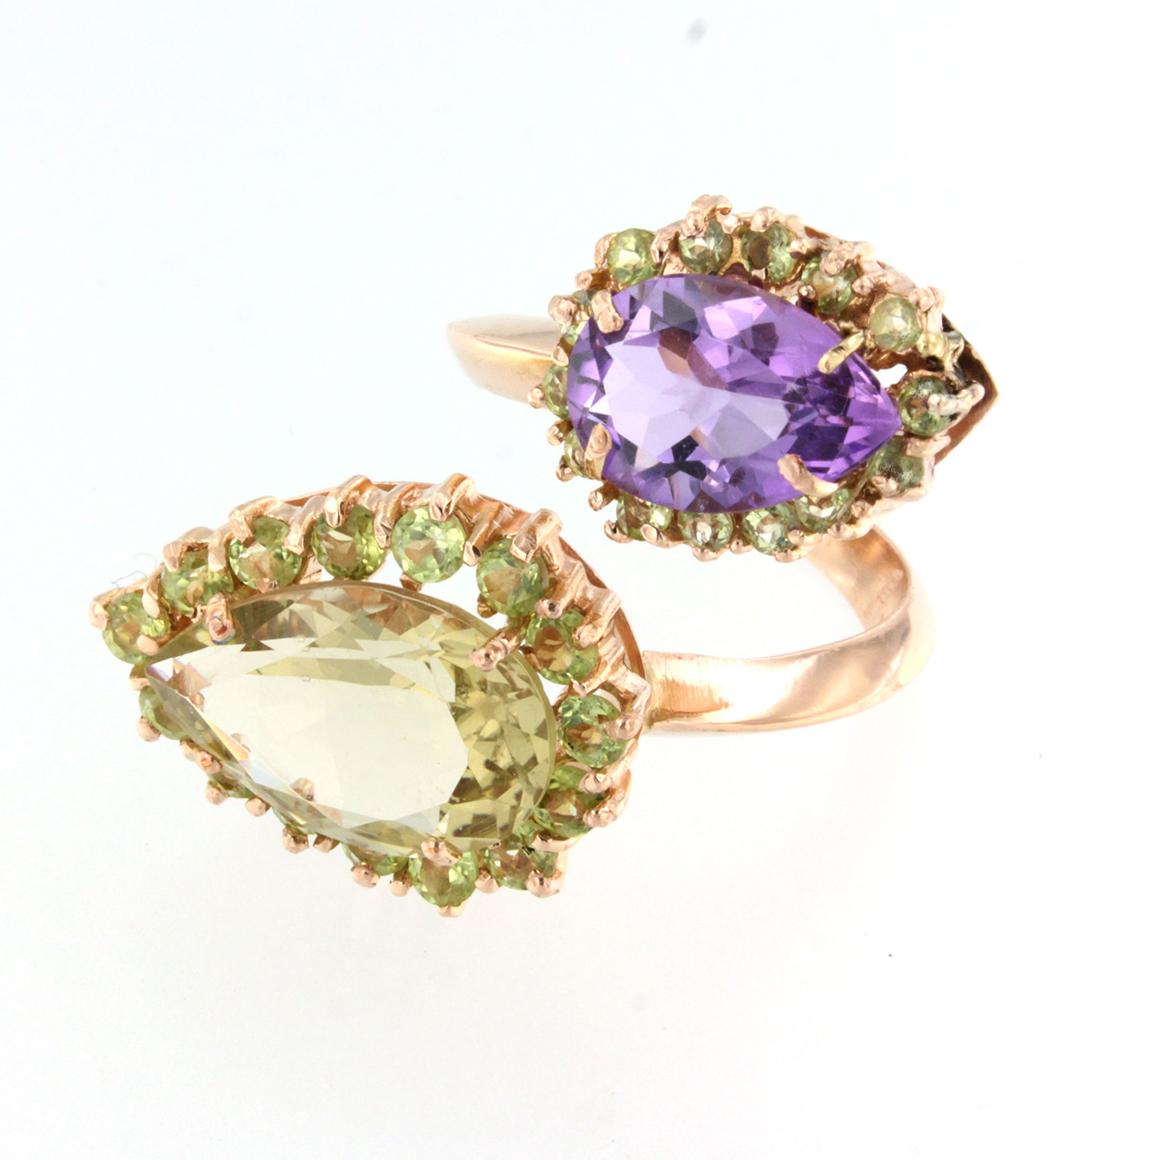 classic and fantastic rose gold ring in 18kt, handmade in Italy by Stanoppi Jewellery since 1948.
Stones: peridot, amethyst , lemon quartz. 
MIS : 14  USA 8  g.13,00
Possibile to have the earrings in set.

All Stanoppi Jewelry is new and has never